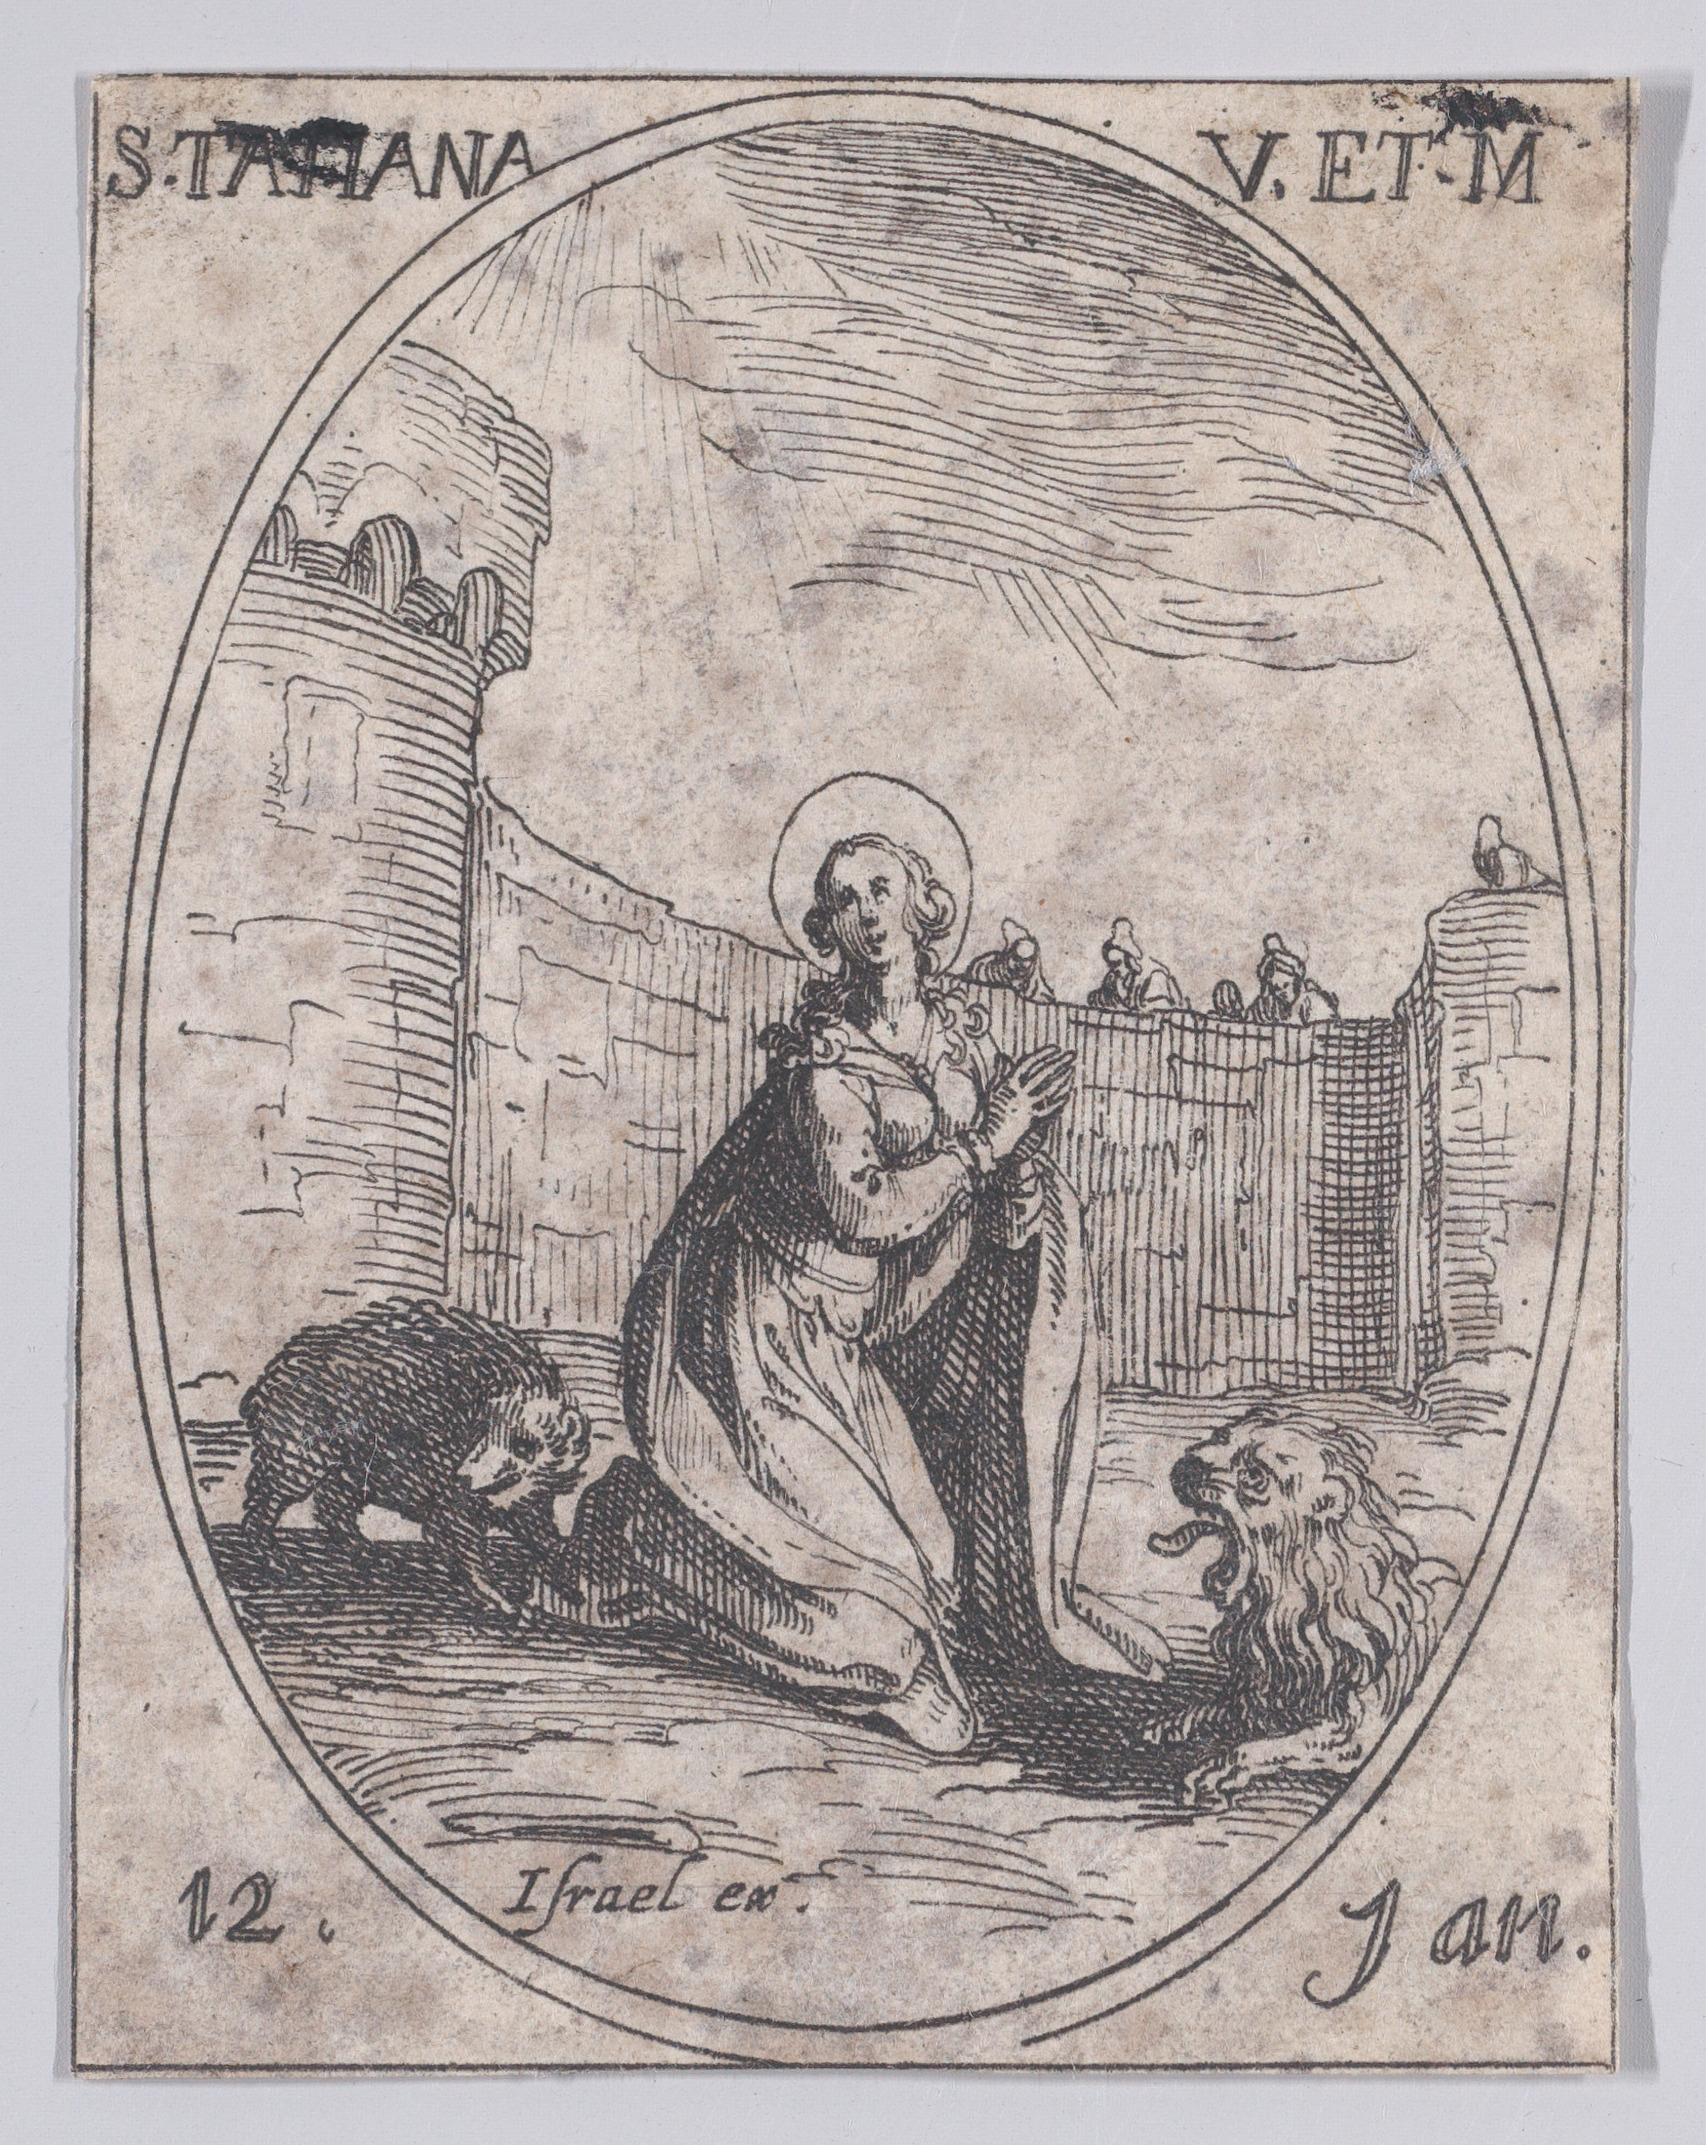 Ste. Tatienne, vierge et martyre (St. Tatiana, Virgin and Martyr), January 12th, from Les Images De Tous Les Saincts et Saintes de L'Année (Images of All of the Saints and Religious Events of the Year), Jacques Callot (French, Nancy 1592–1635 Nancy), Etching; second state of two (Lieure)